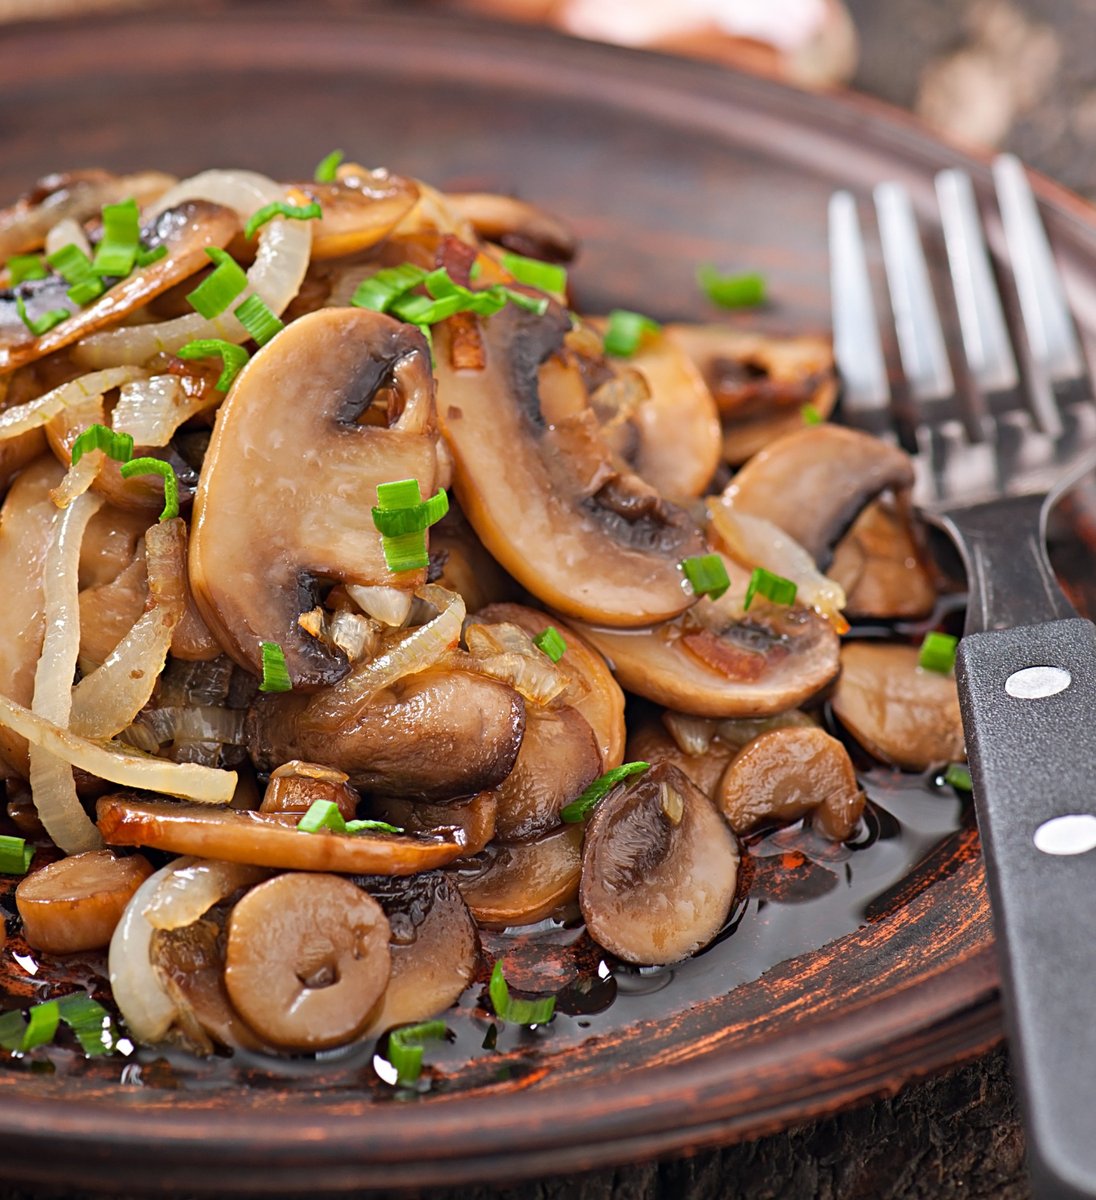 Discover the power of #mushrooms for a stronger heart and #health! 🍄 Known for lowering #cholesterol and regulating #bloodsugar levels, these versatile mushrooms are a must-have addition to your #diet
Enjoy them raw  and take advantage of all their benefits for a healthier life!